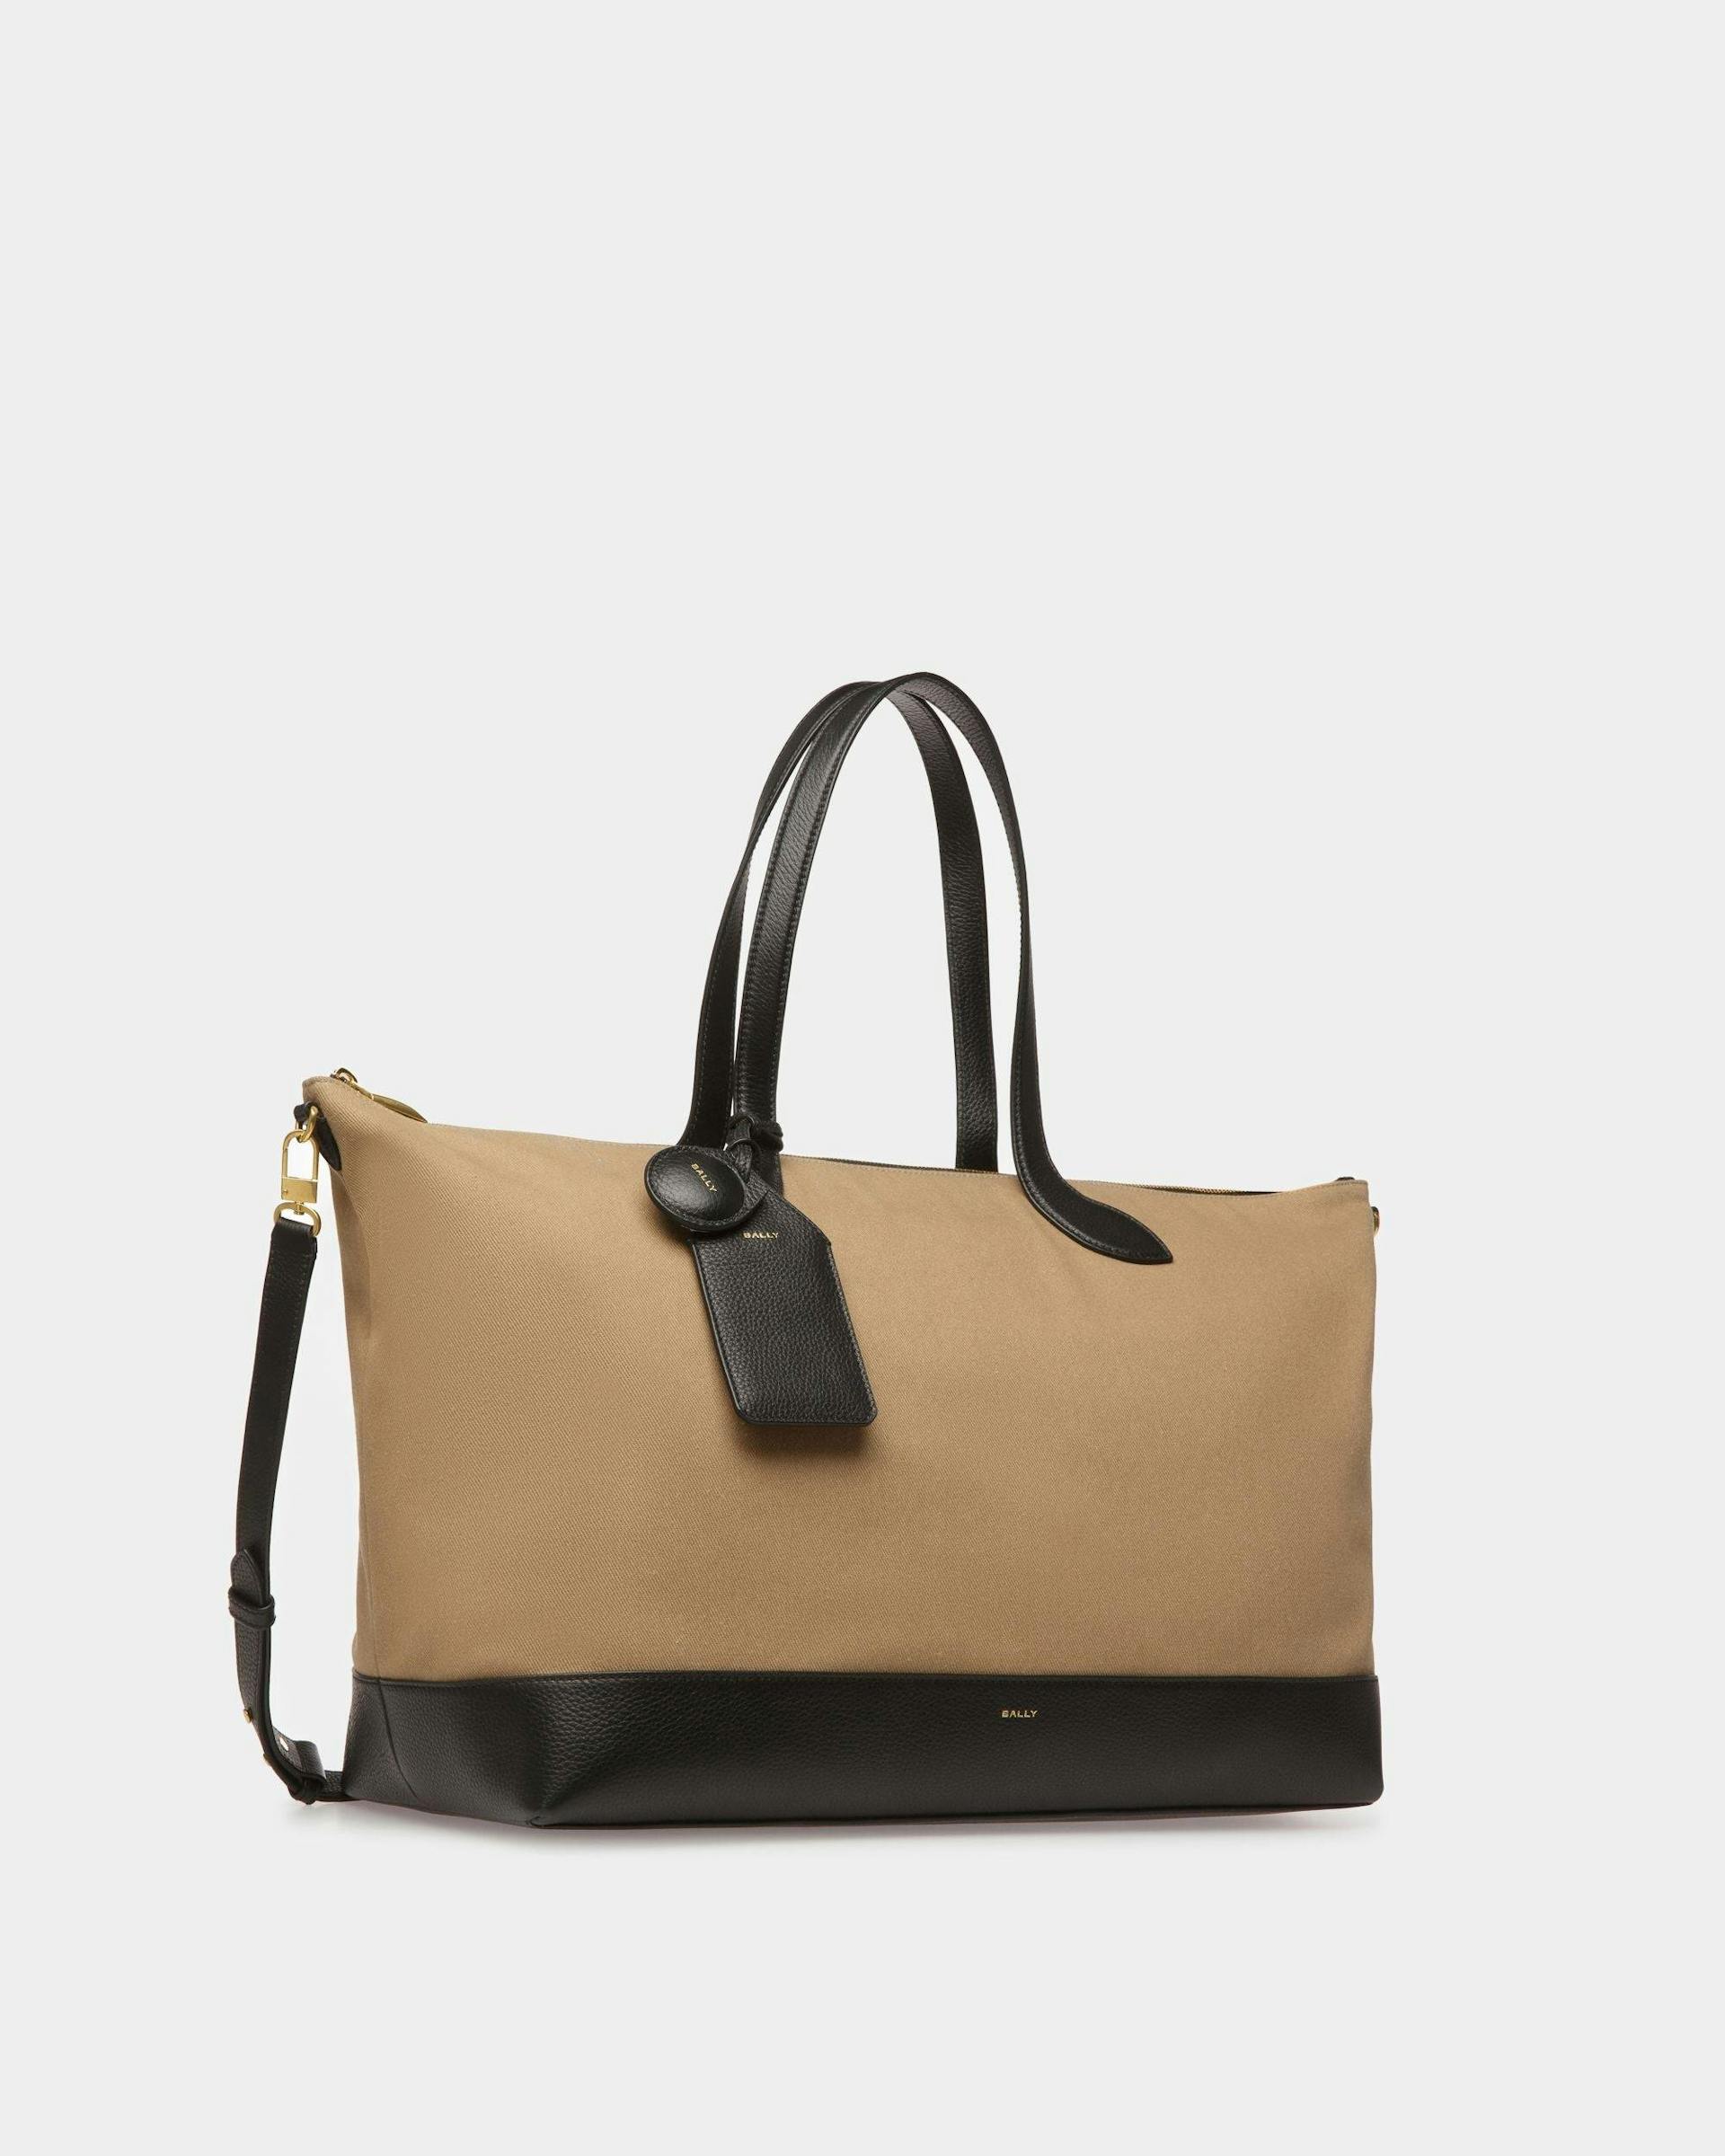 Women's Bar Tote Bag In sand And Black Fabric | Bally | Still Life 3/4 Front